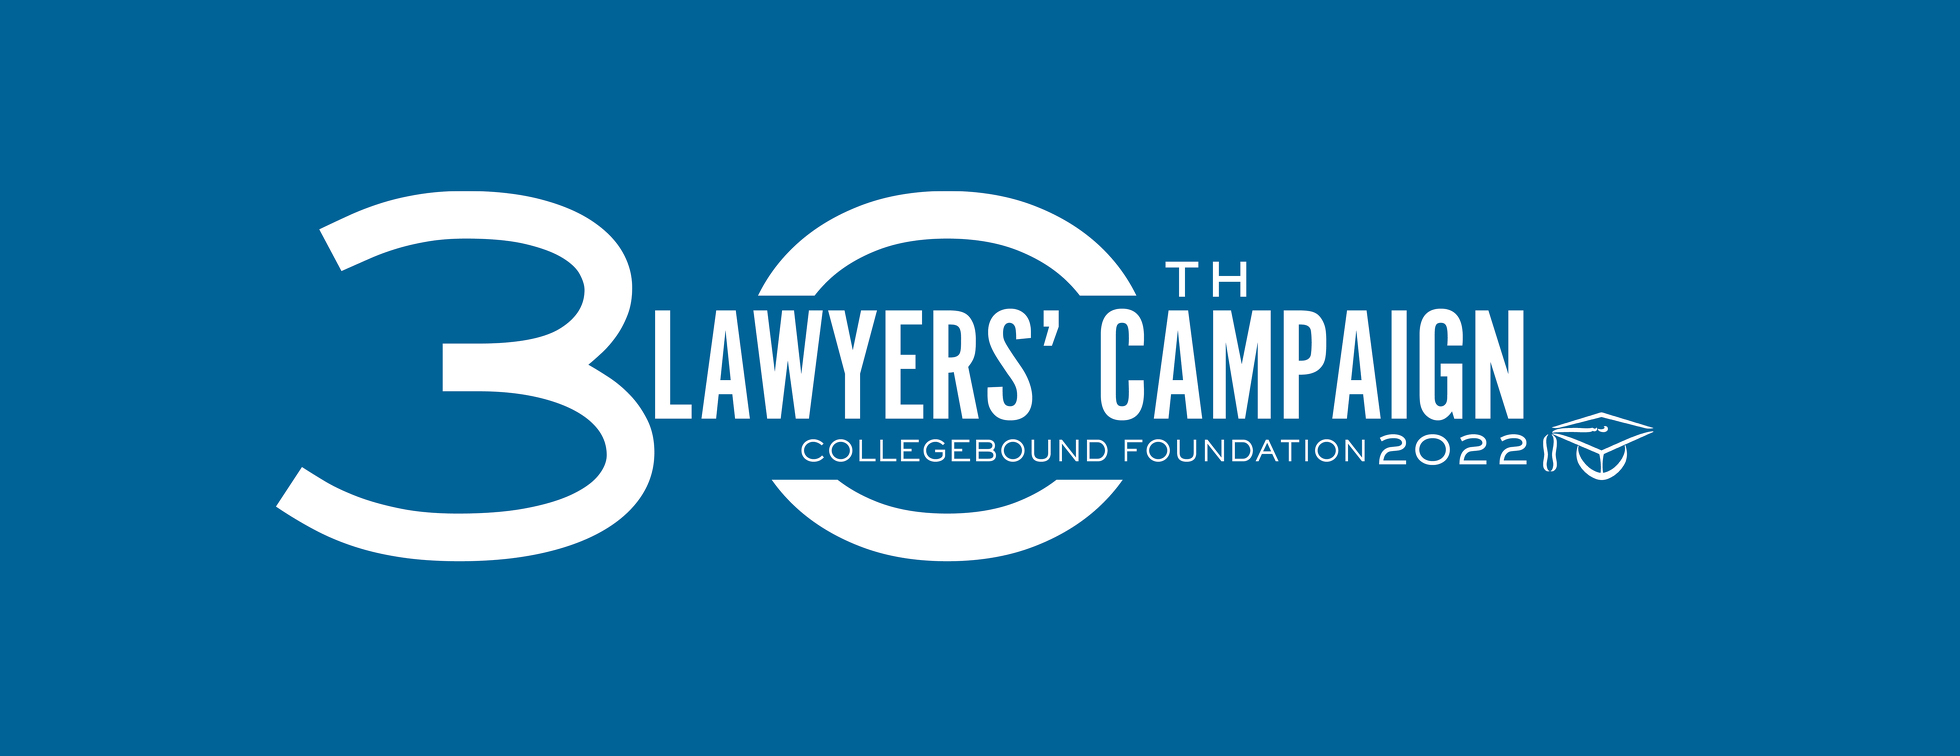 30th Annual Lawyers' Campaign for CollegeBound